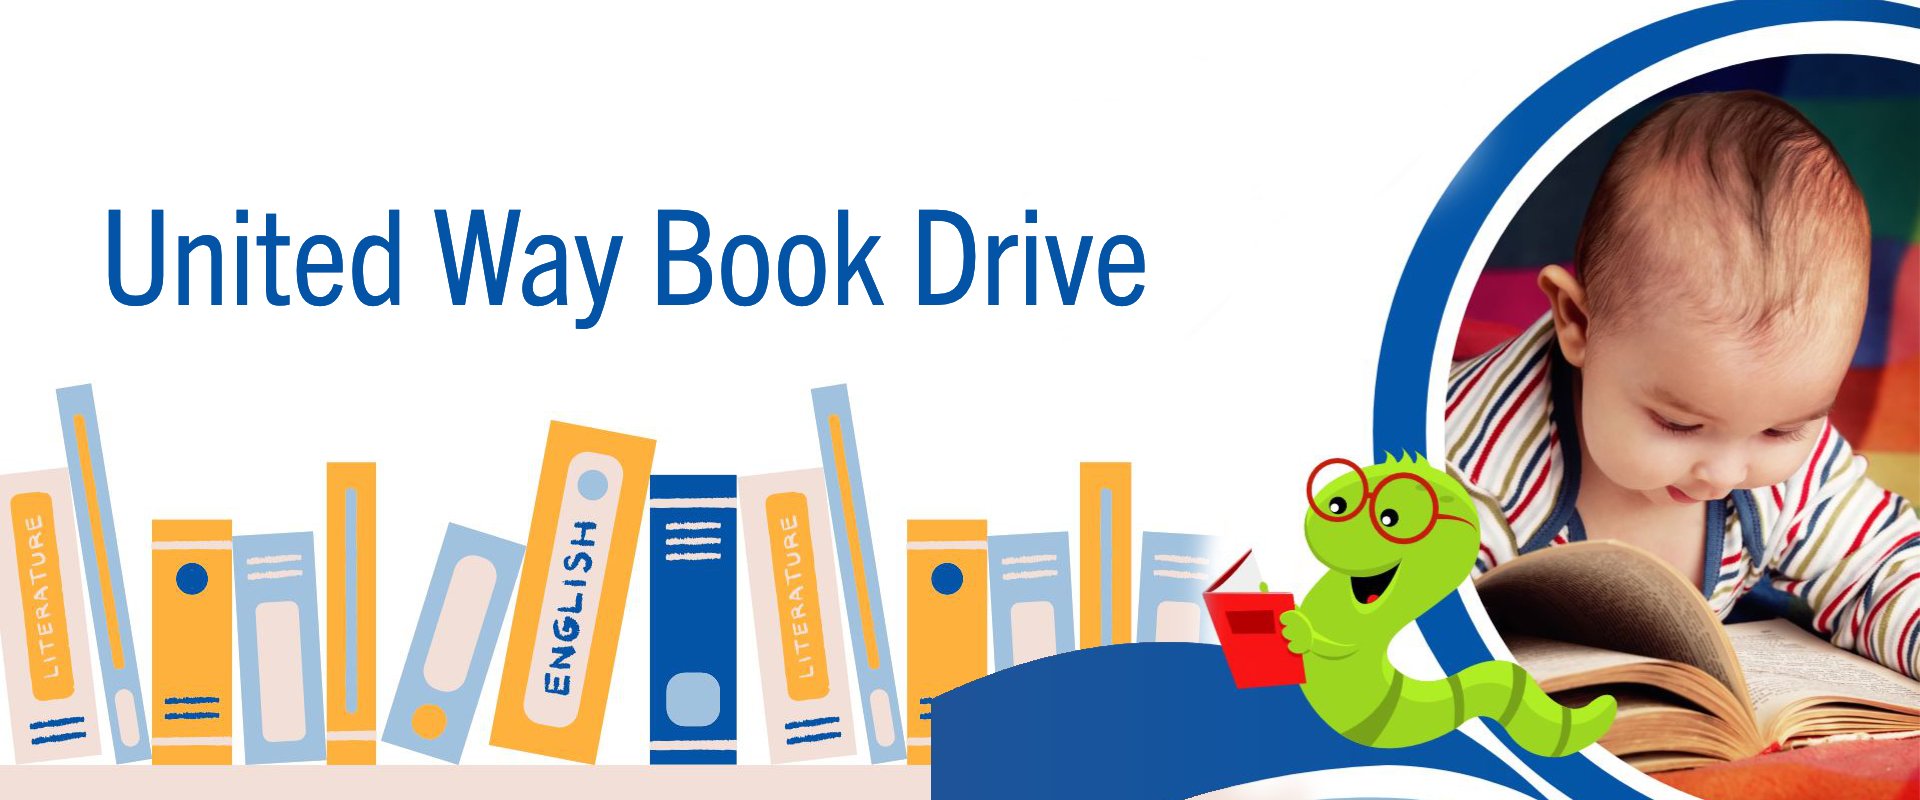 An image of books and an infant reading a book with the text United Way Book Drive